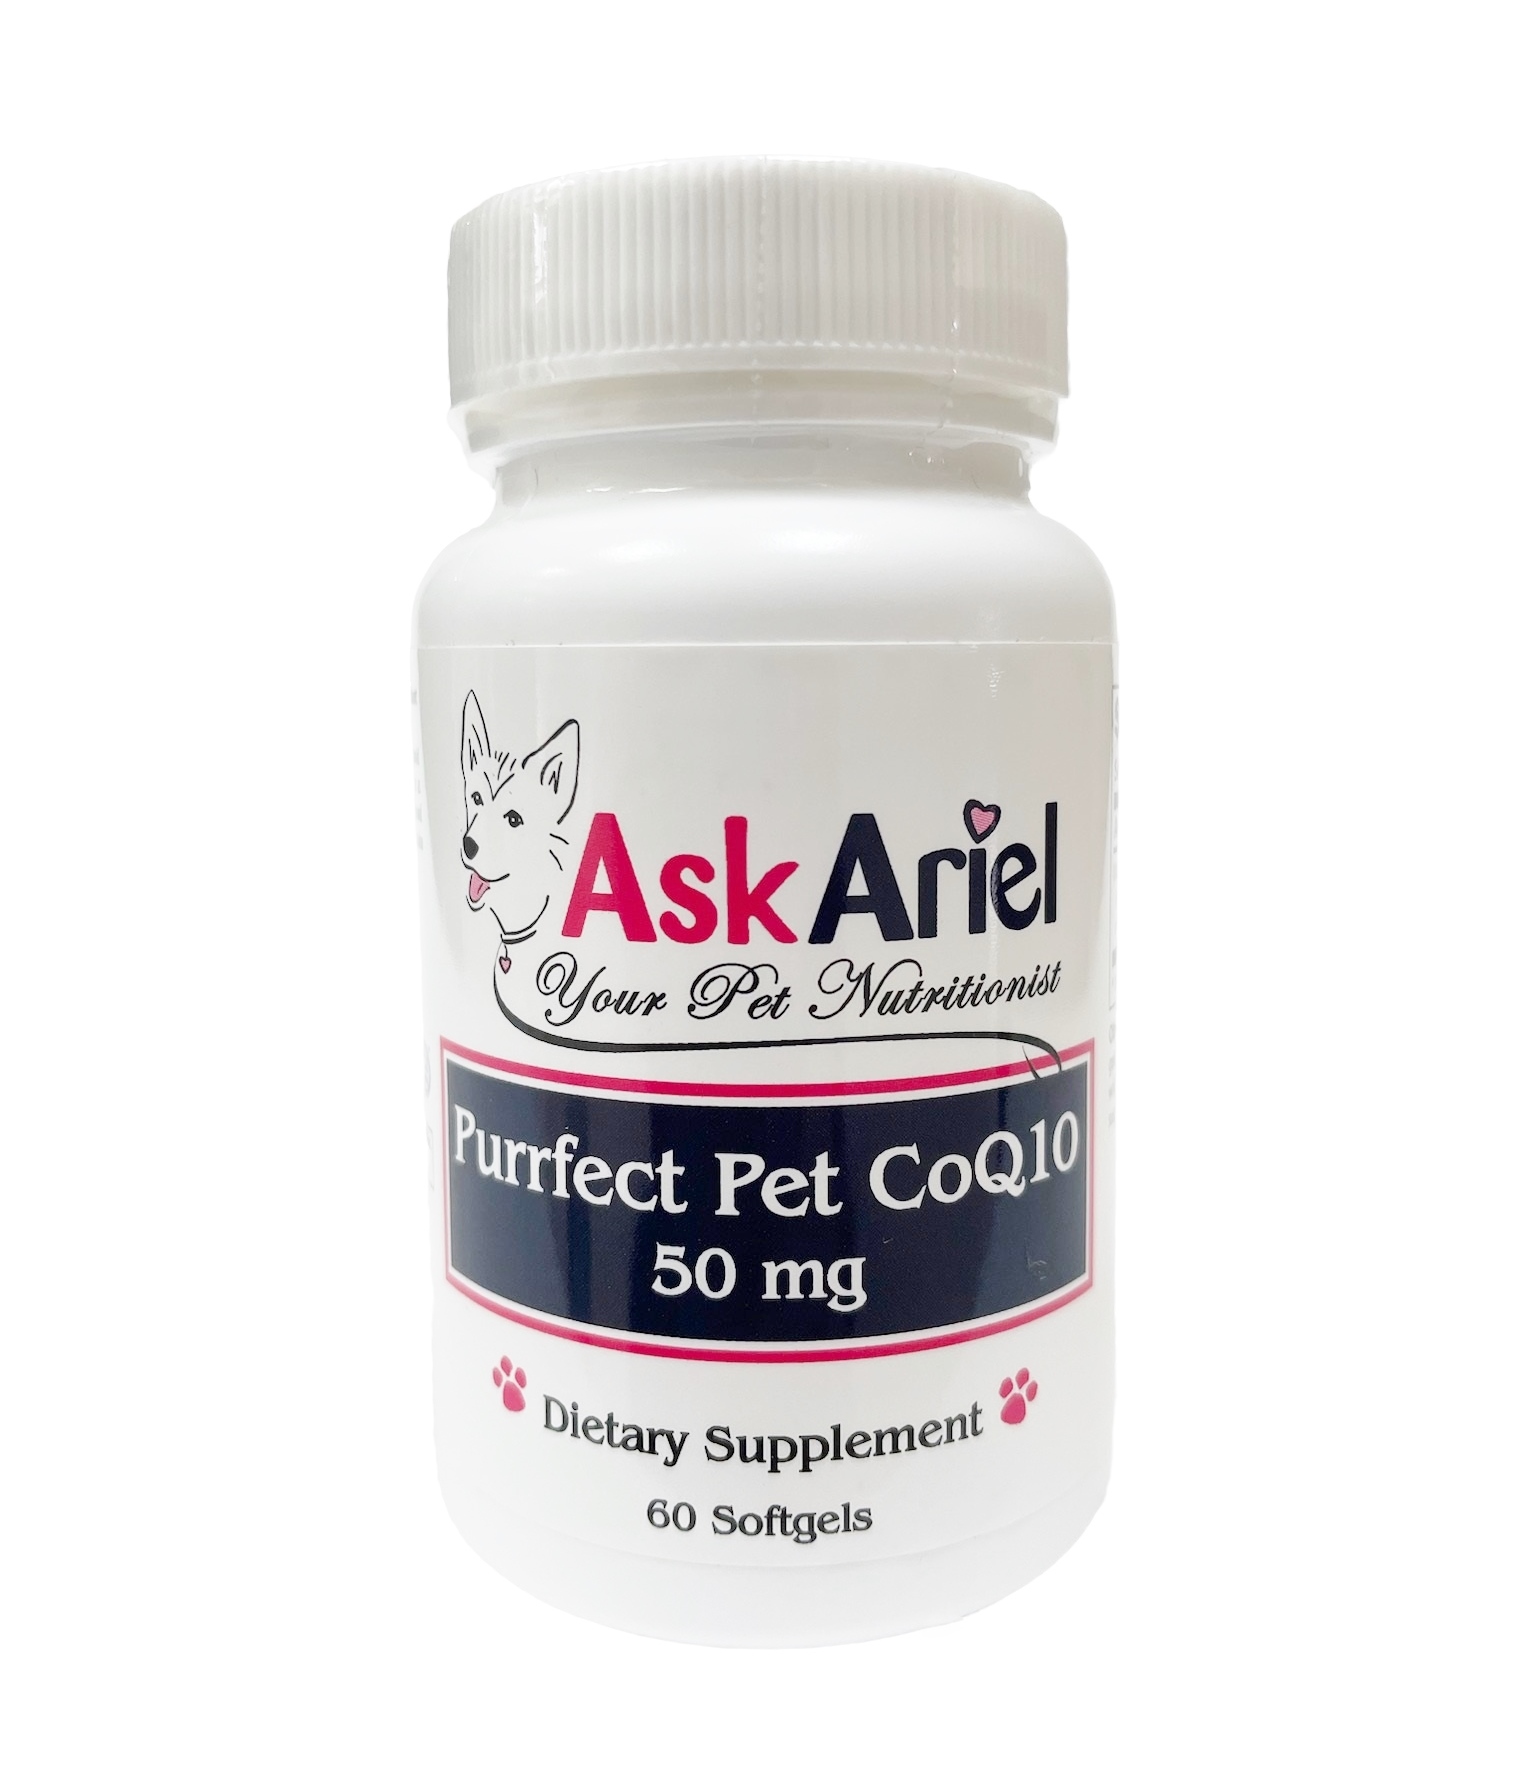 Coenzyme Q10 for dogs